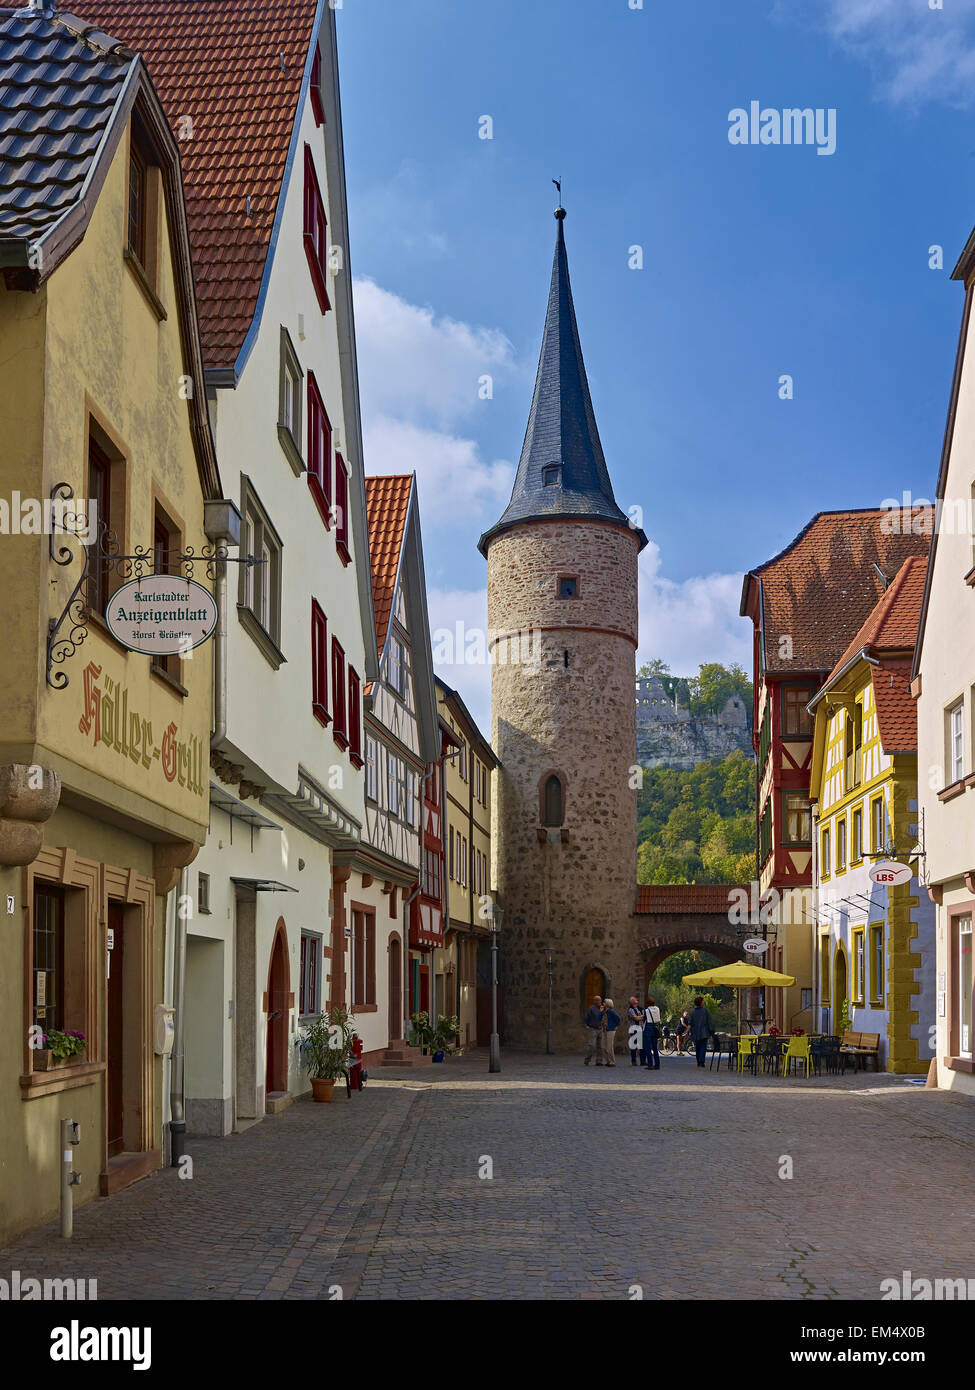 Maingasse street with Main Gate in Karlstadt, Germany Stock Photo